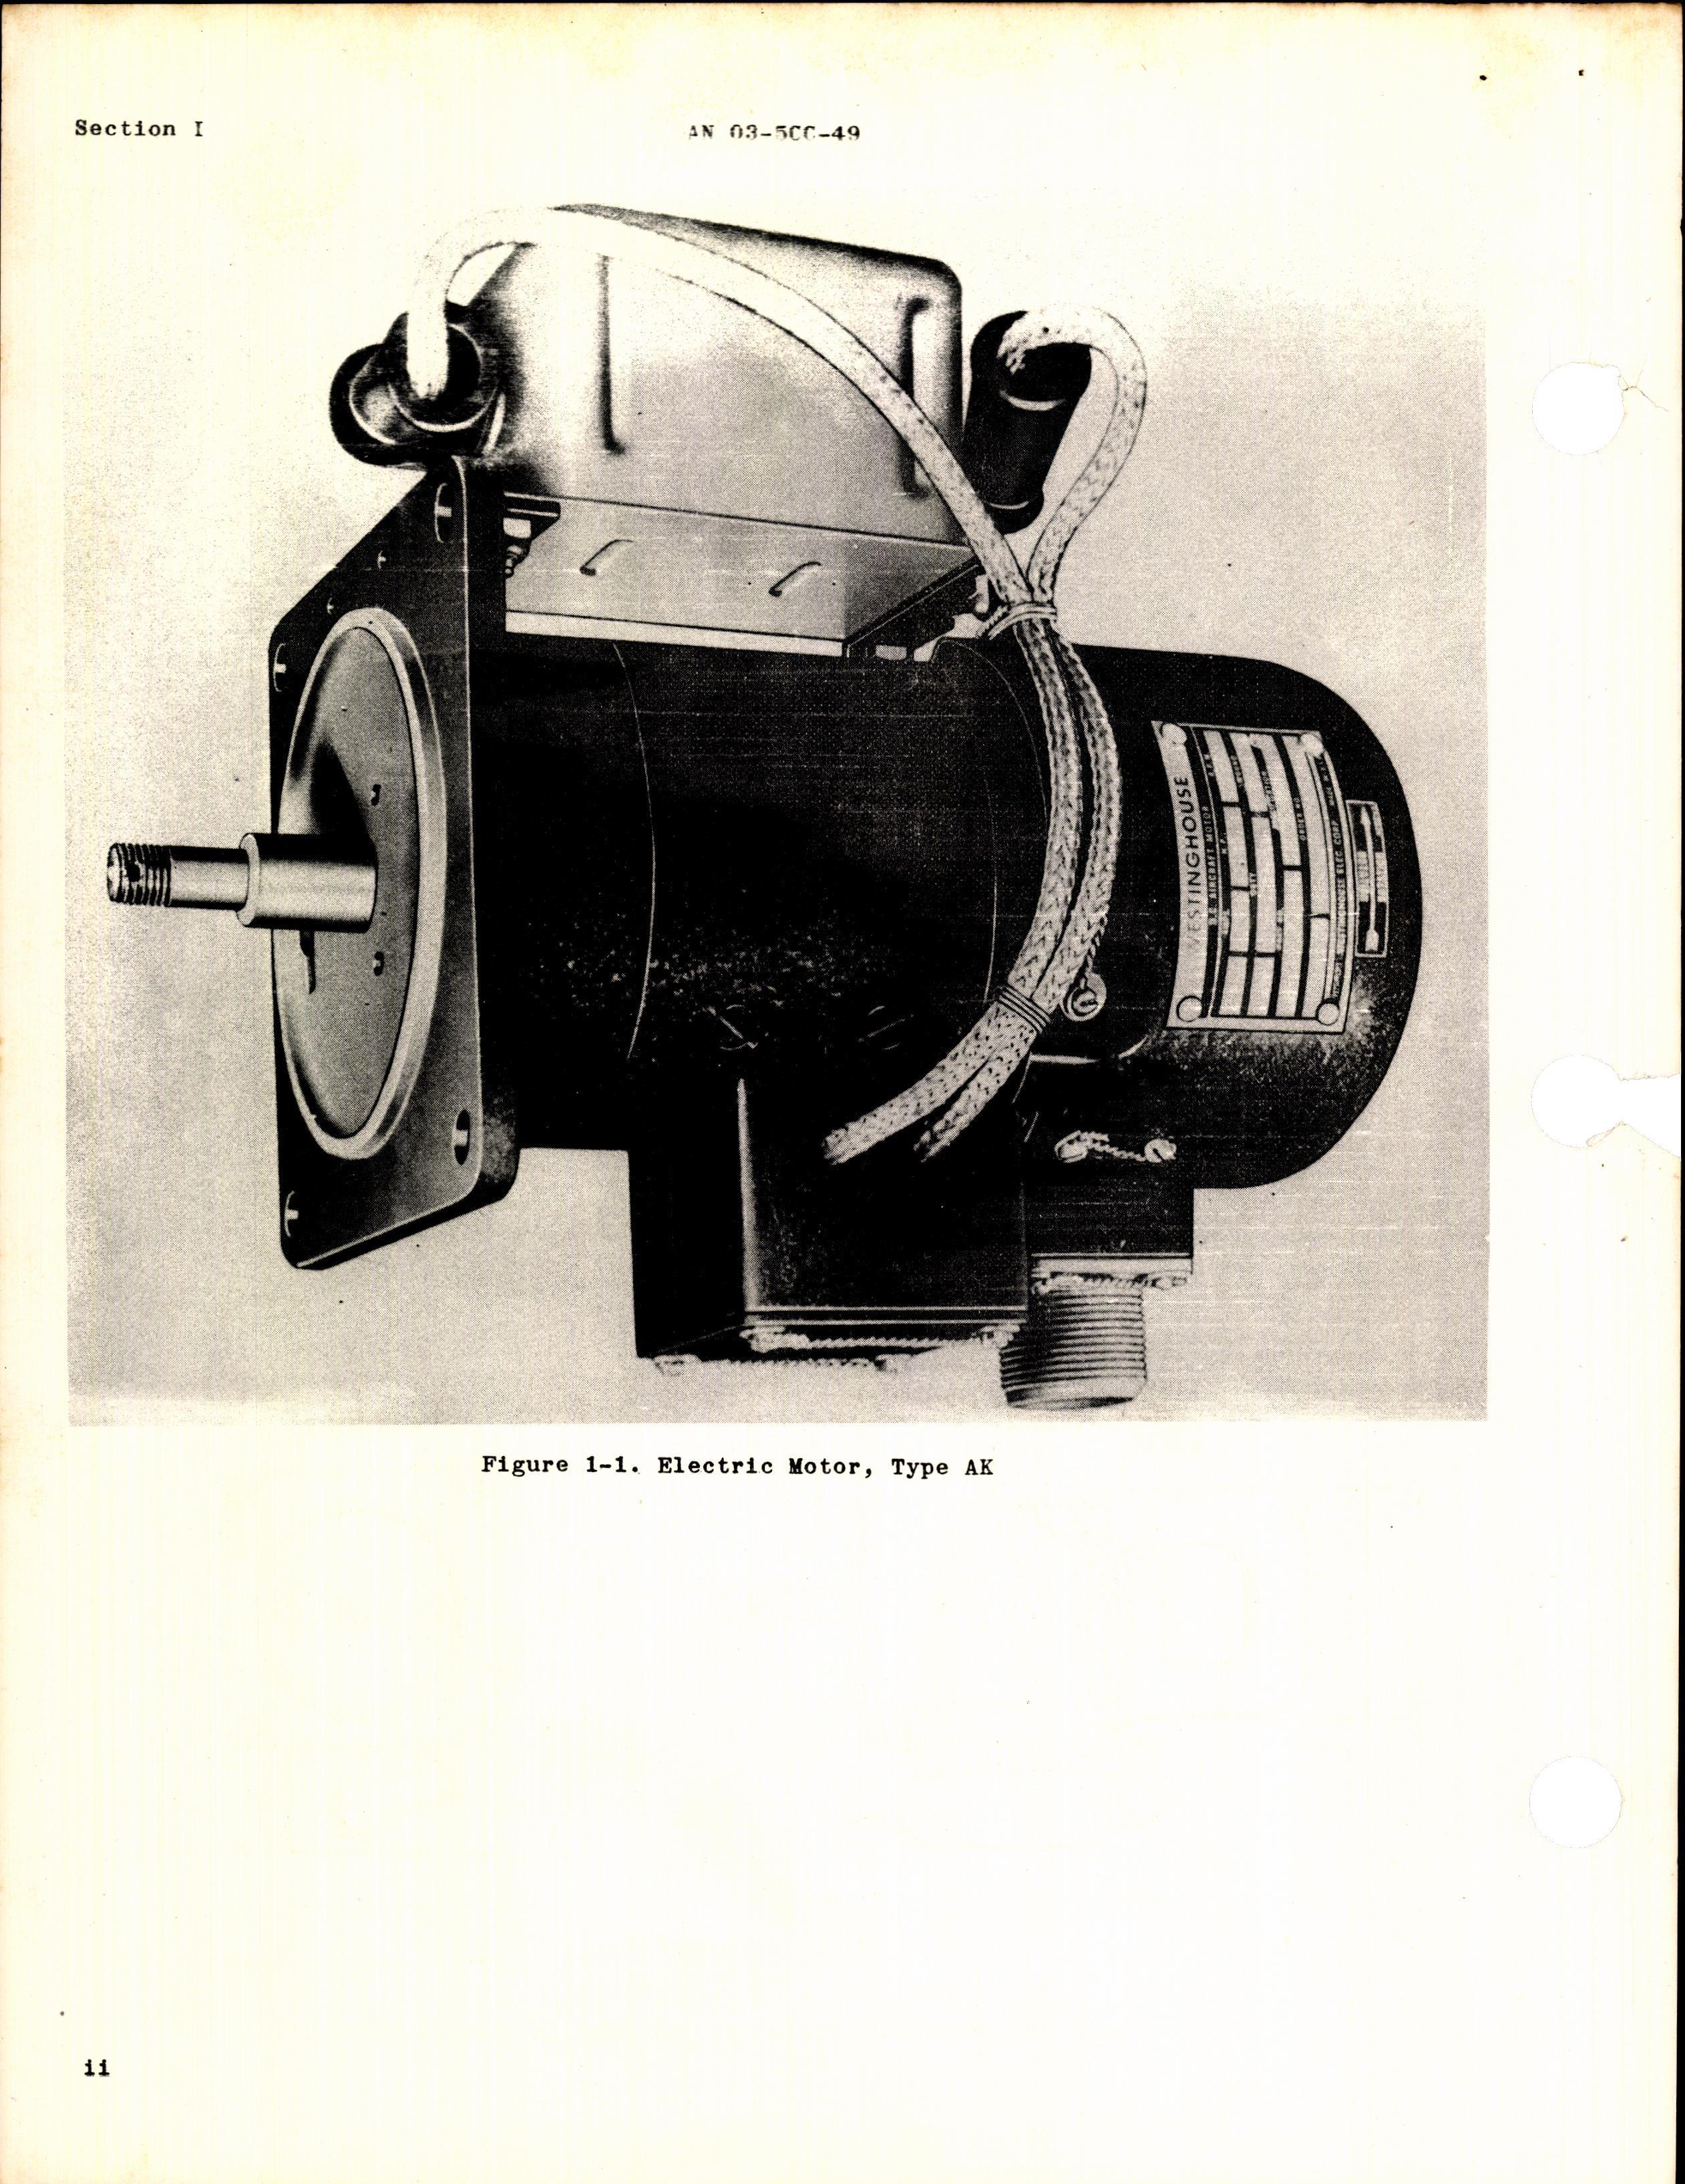 Sample page 4 from AirCorps Library document: Overhaul Instructions for Westinghouse Electric Motor